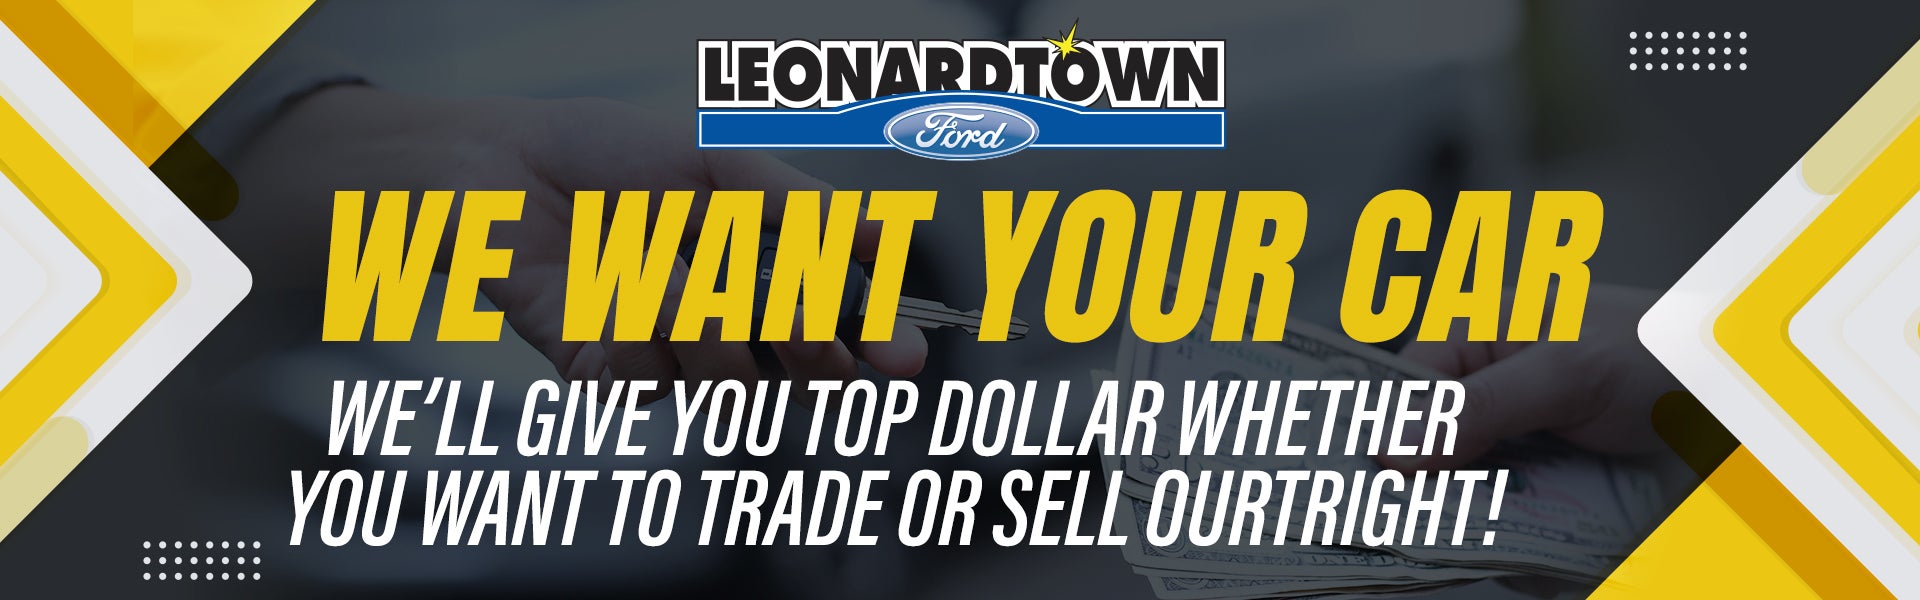 We Want Your Car!